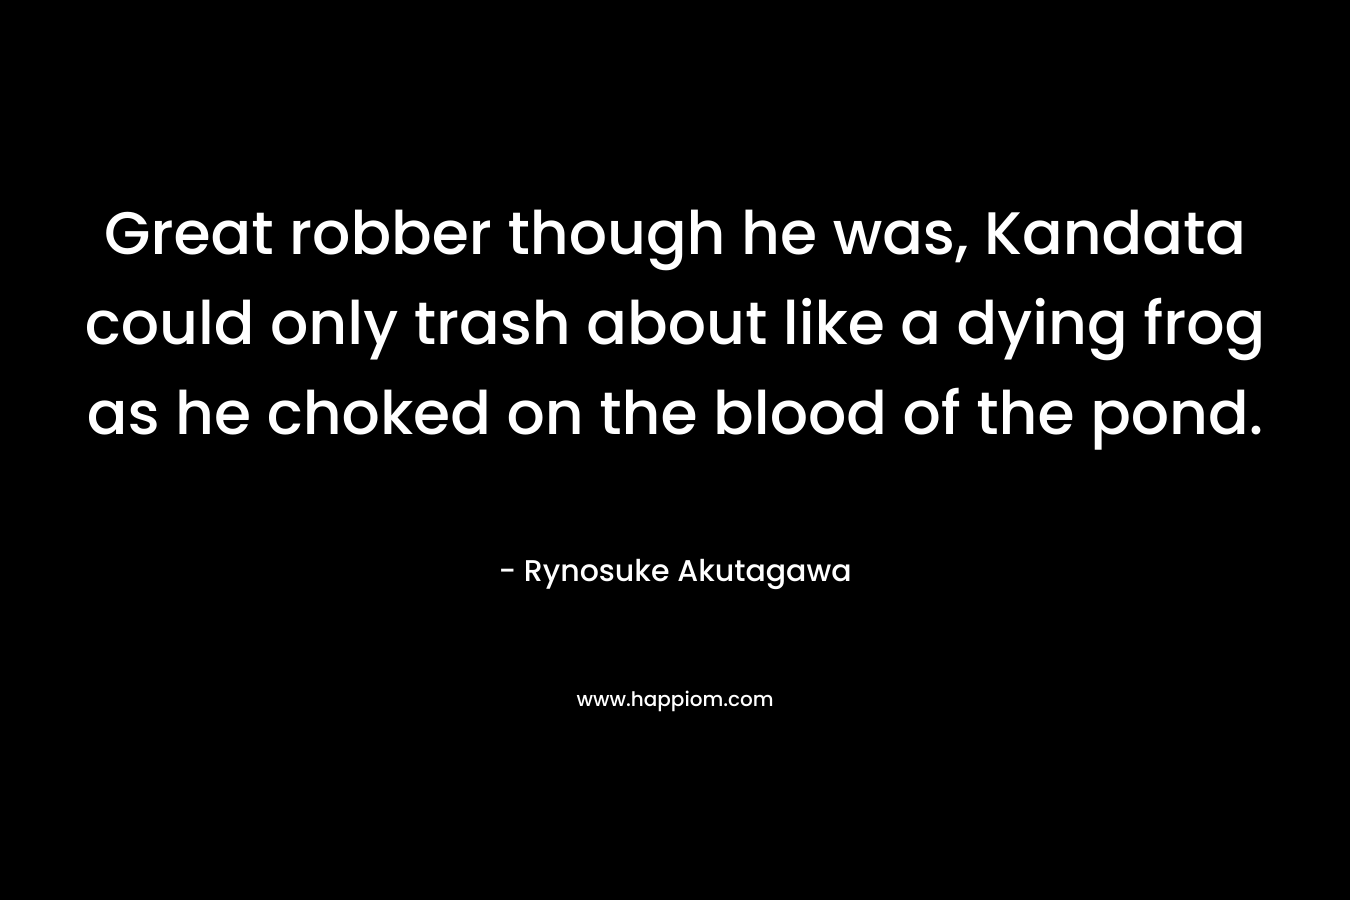 Great robber though he was, Kandata could only trash about like a dying frog as he choked on the blood of the pond. – Rynosuke Akutagawa